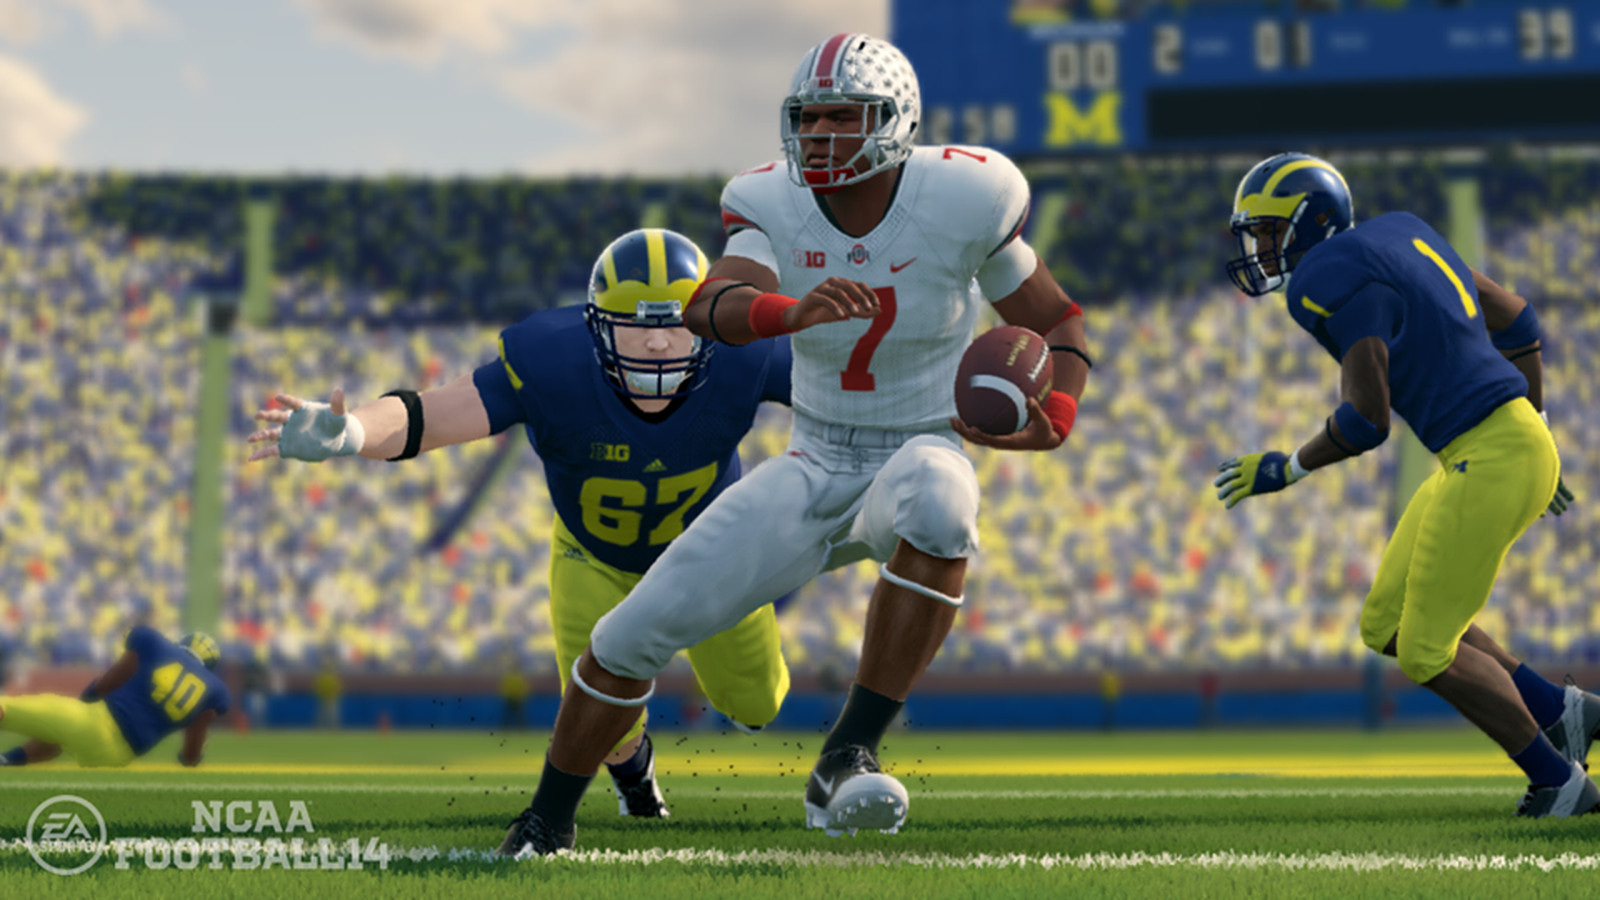 A screenshot from NCAA Football 14. This image is part of an article about how EA has finally provided an update on NCAA Football - and it isn't good.